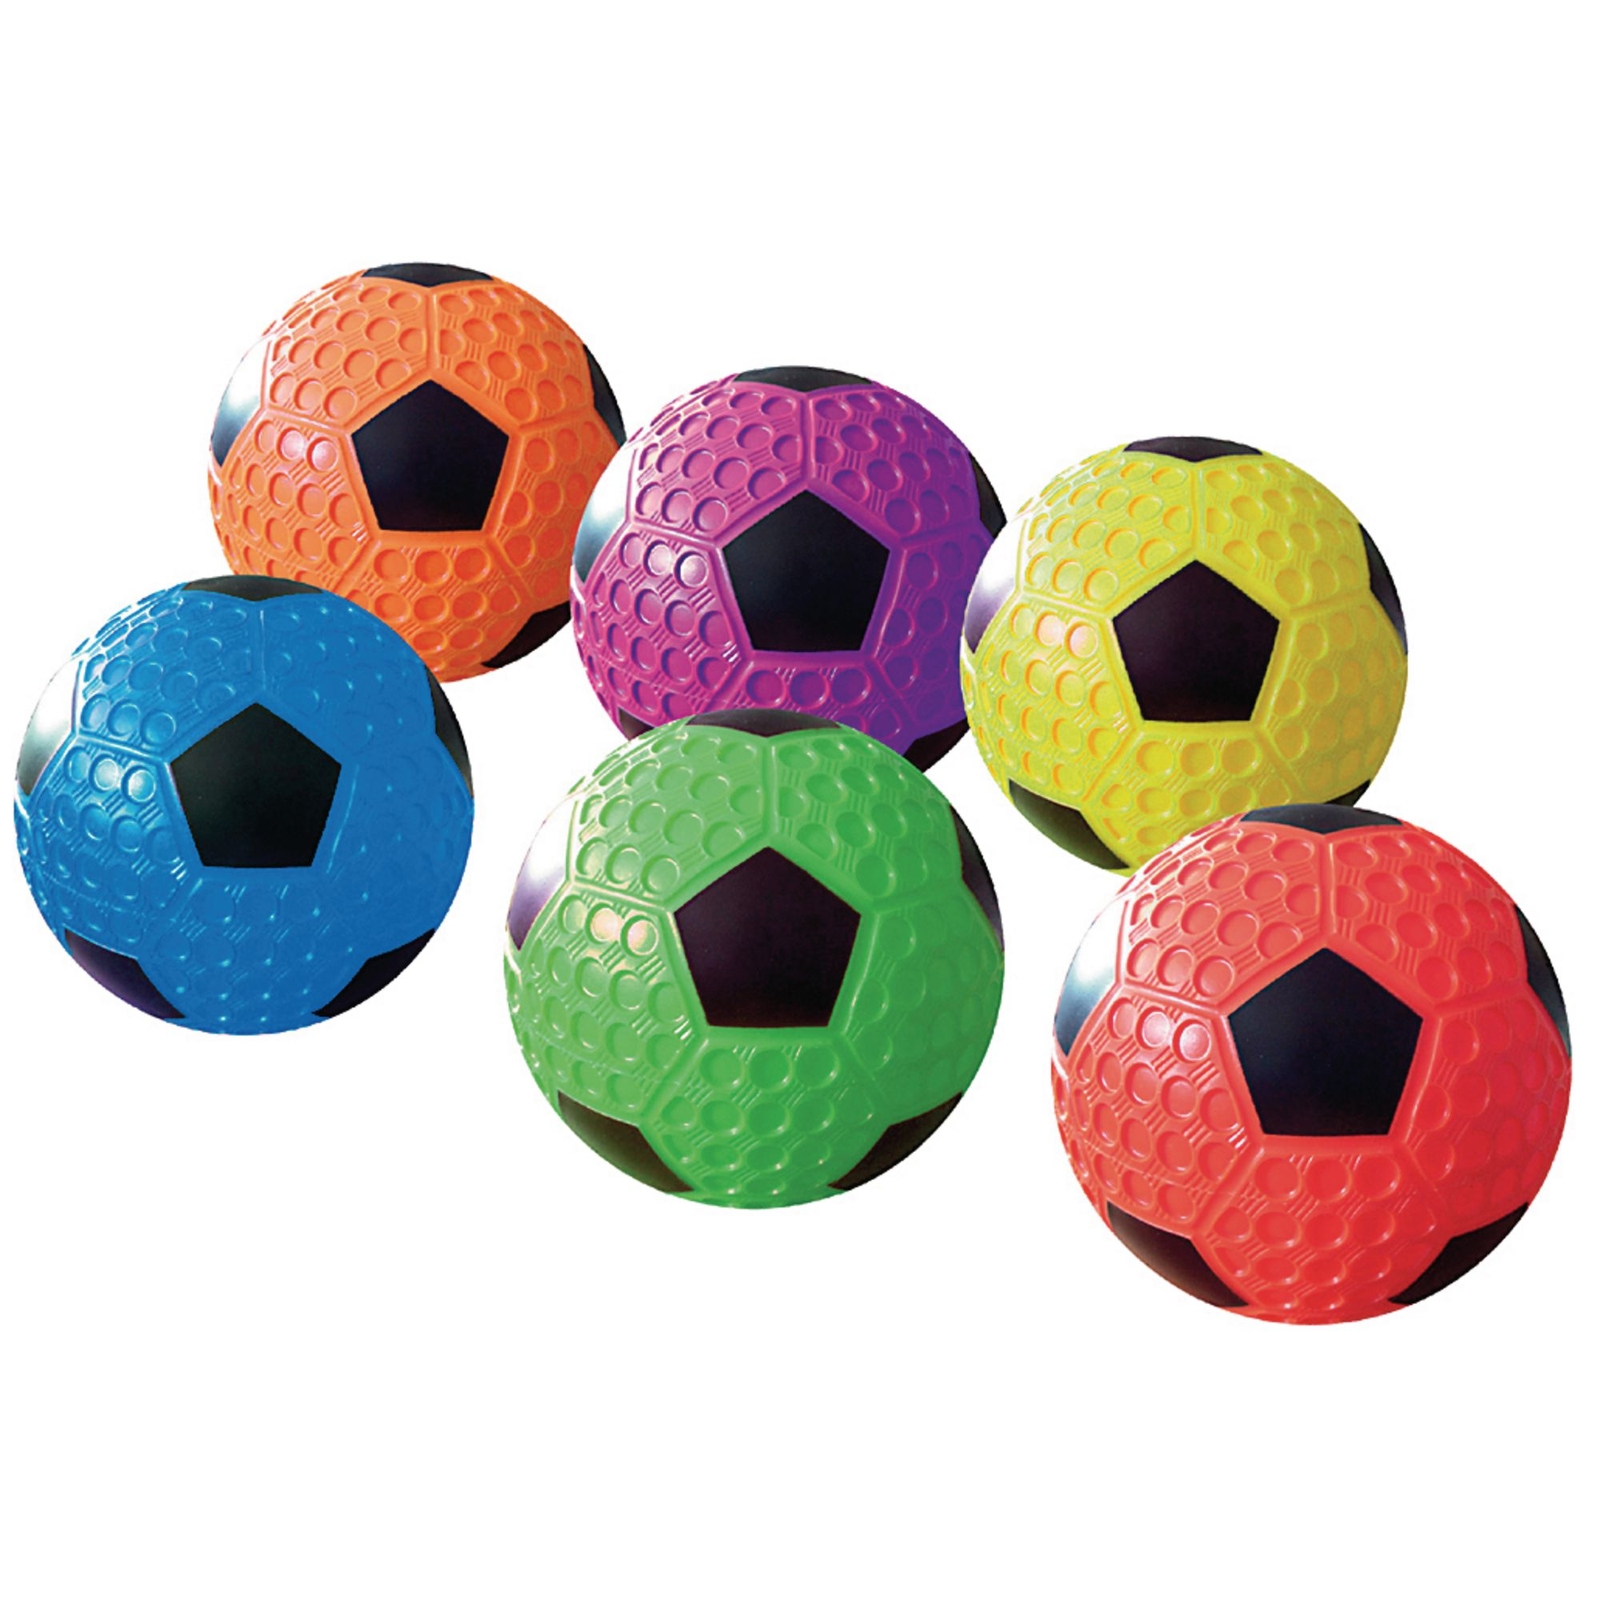 Dimple Soccer Balls - Pack of 6